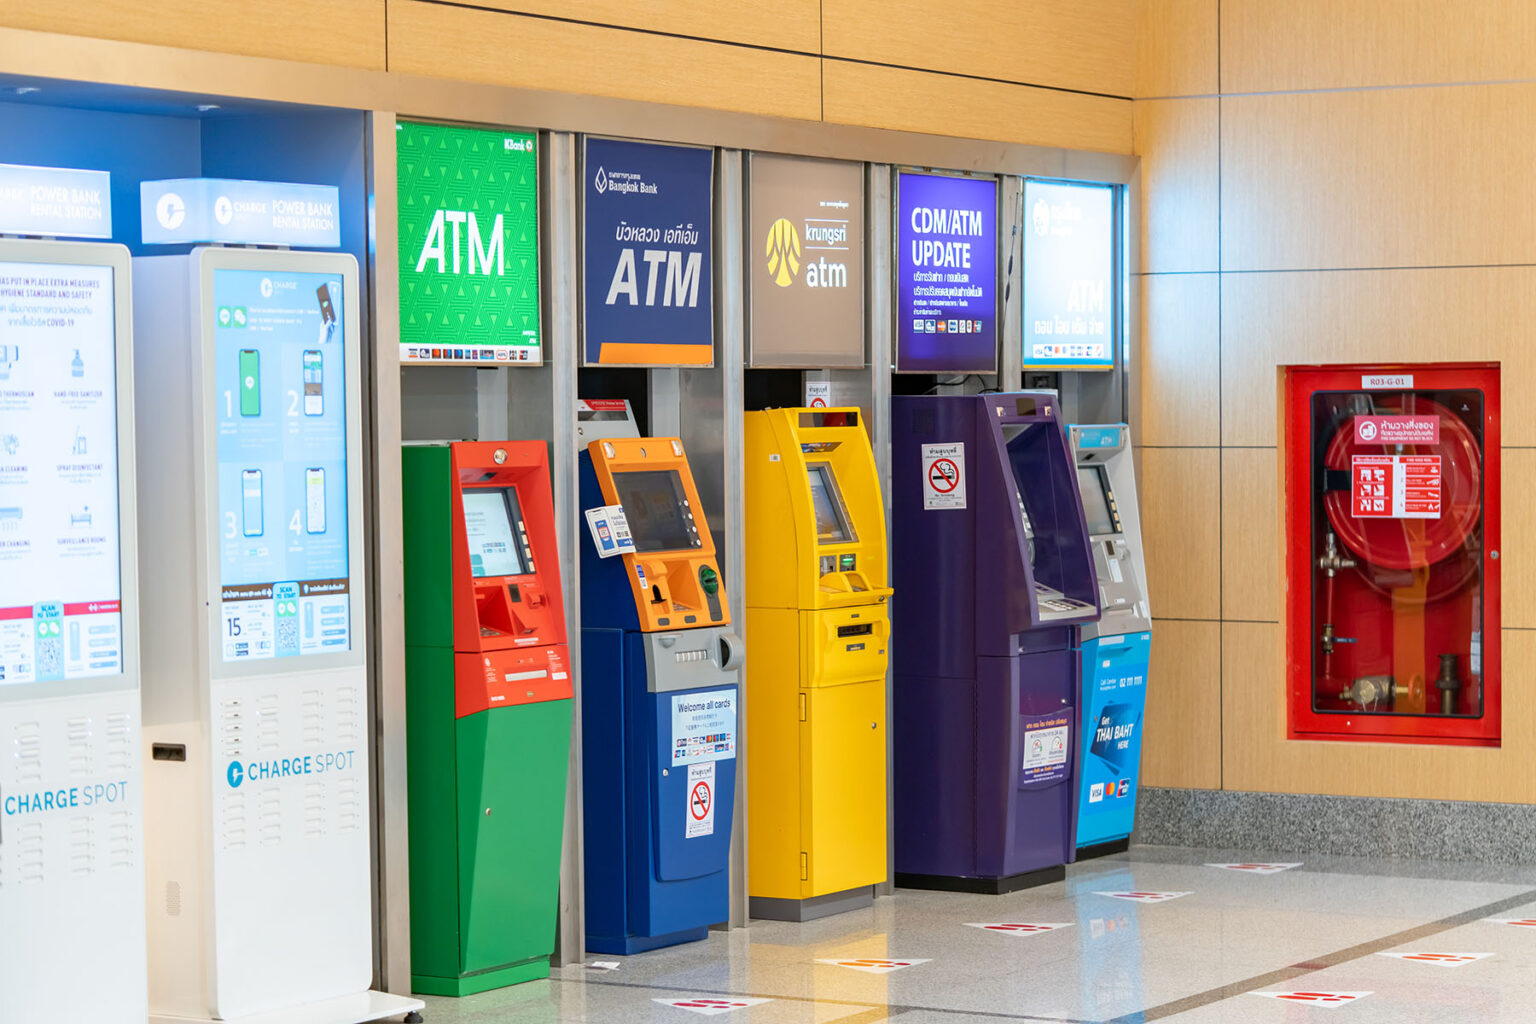 A row of four ATMS, green, blue, yellow, purple, and teal. The corridor is empty.